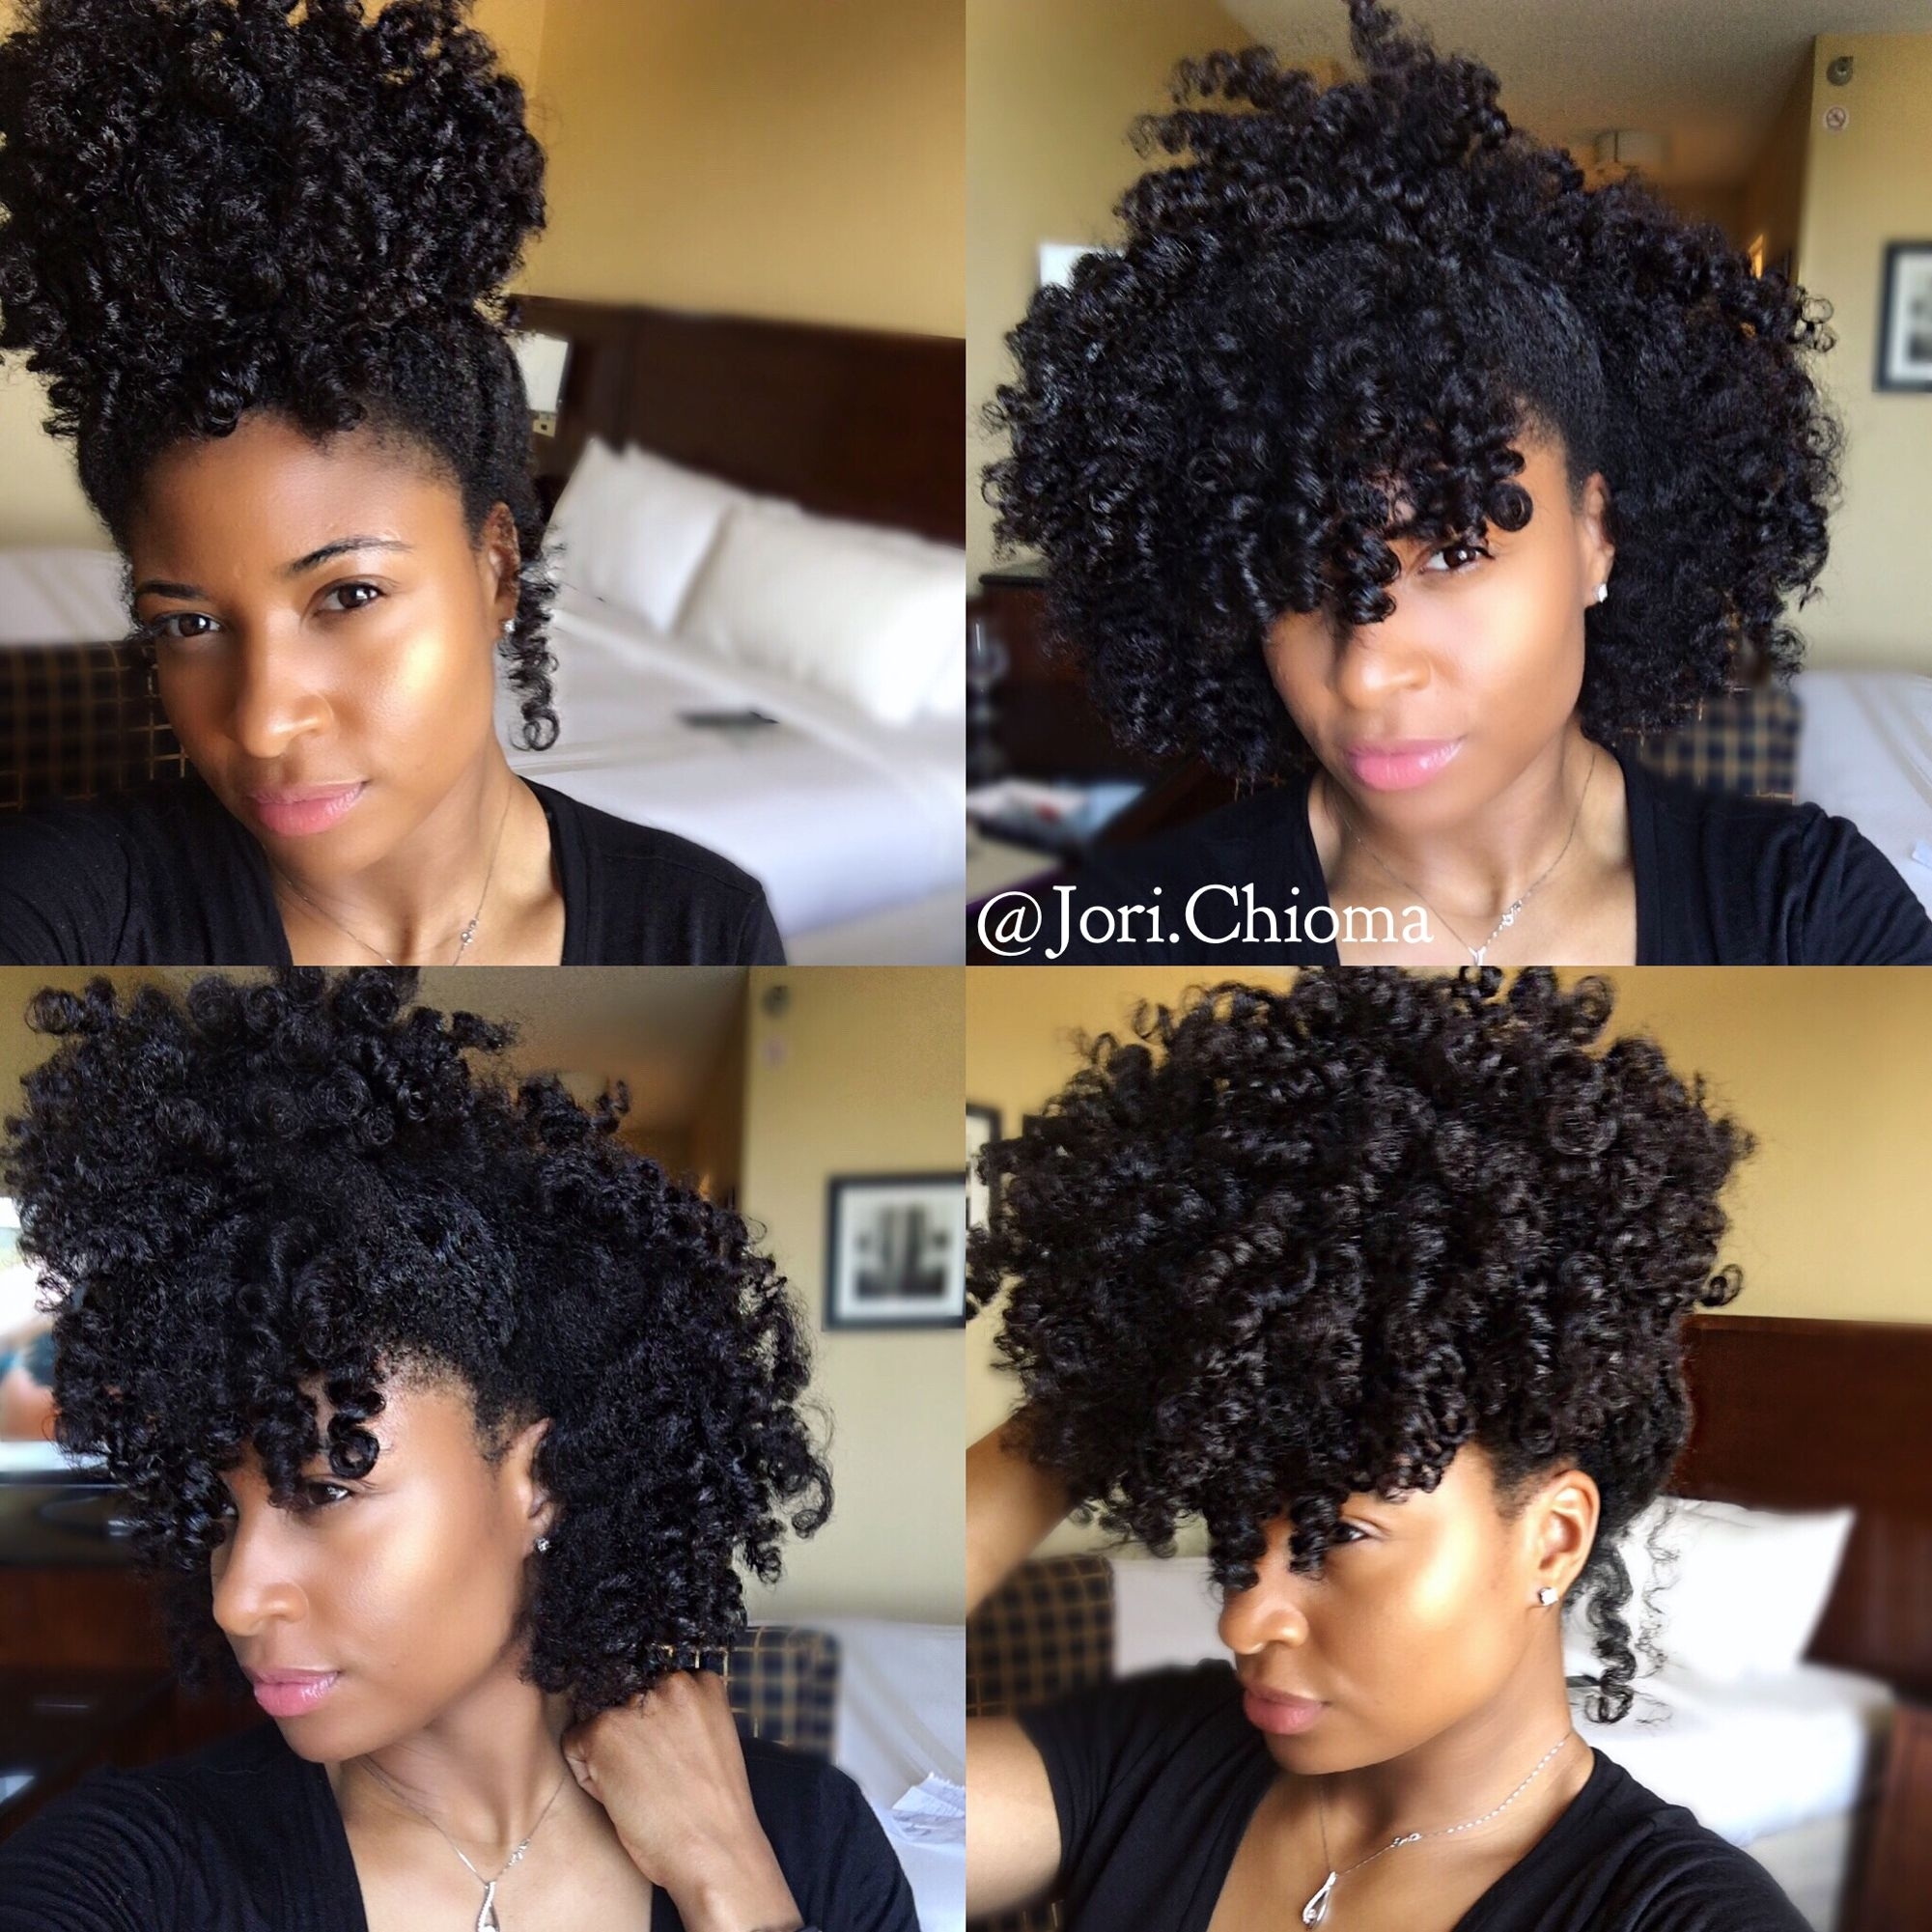 Cute Styles I Could Possibly Do With My Curls Or Perm Rod within Hair Styles For Rod Sets